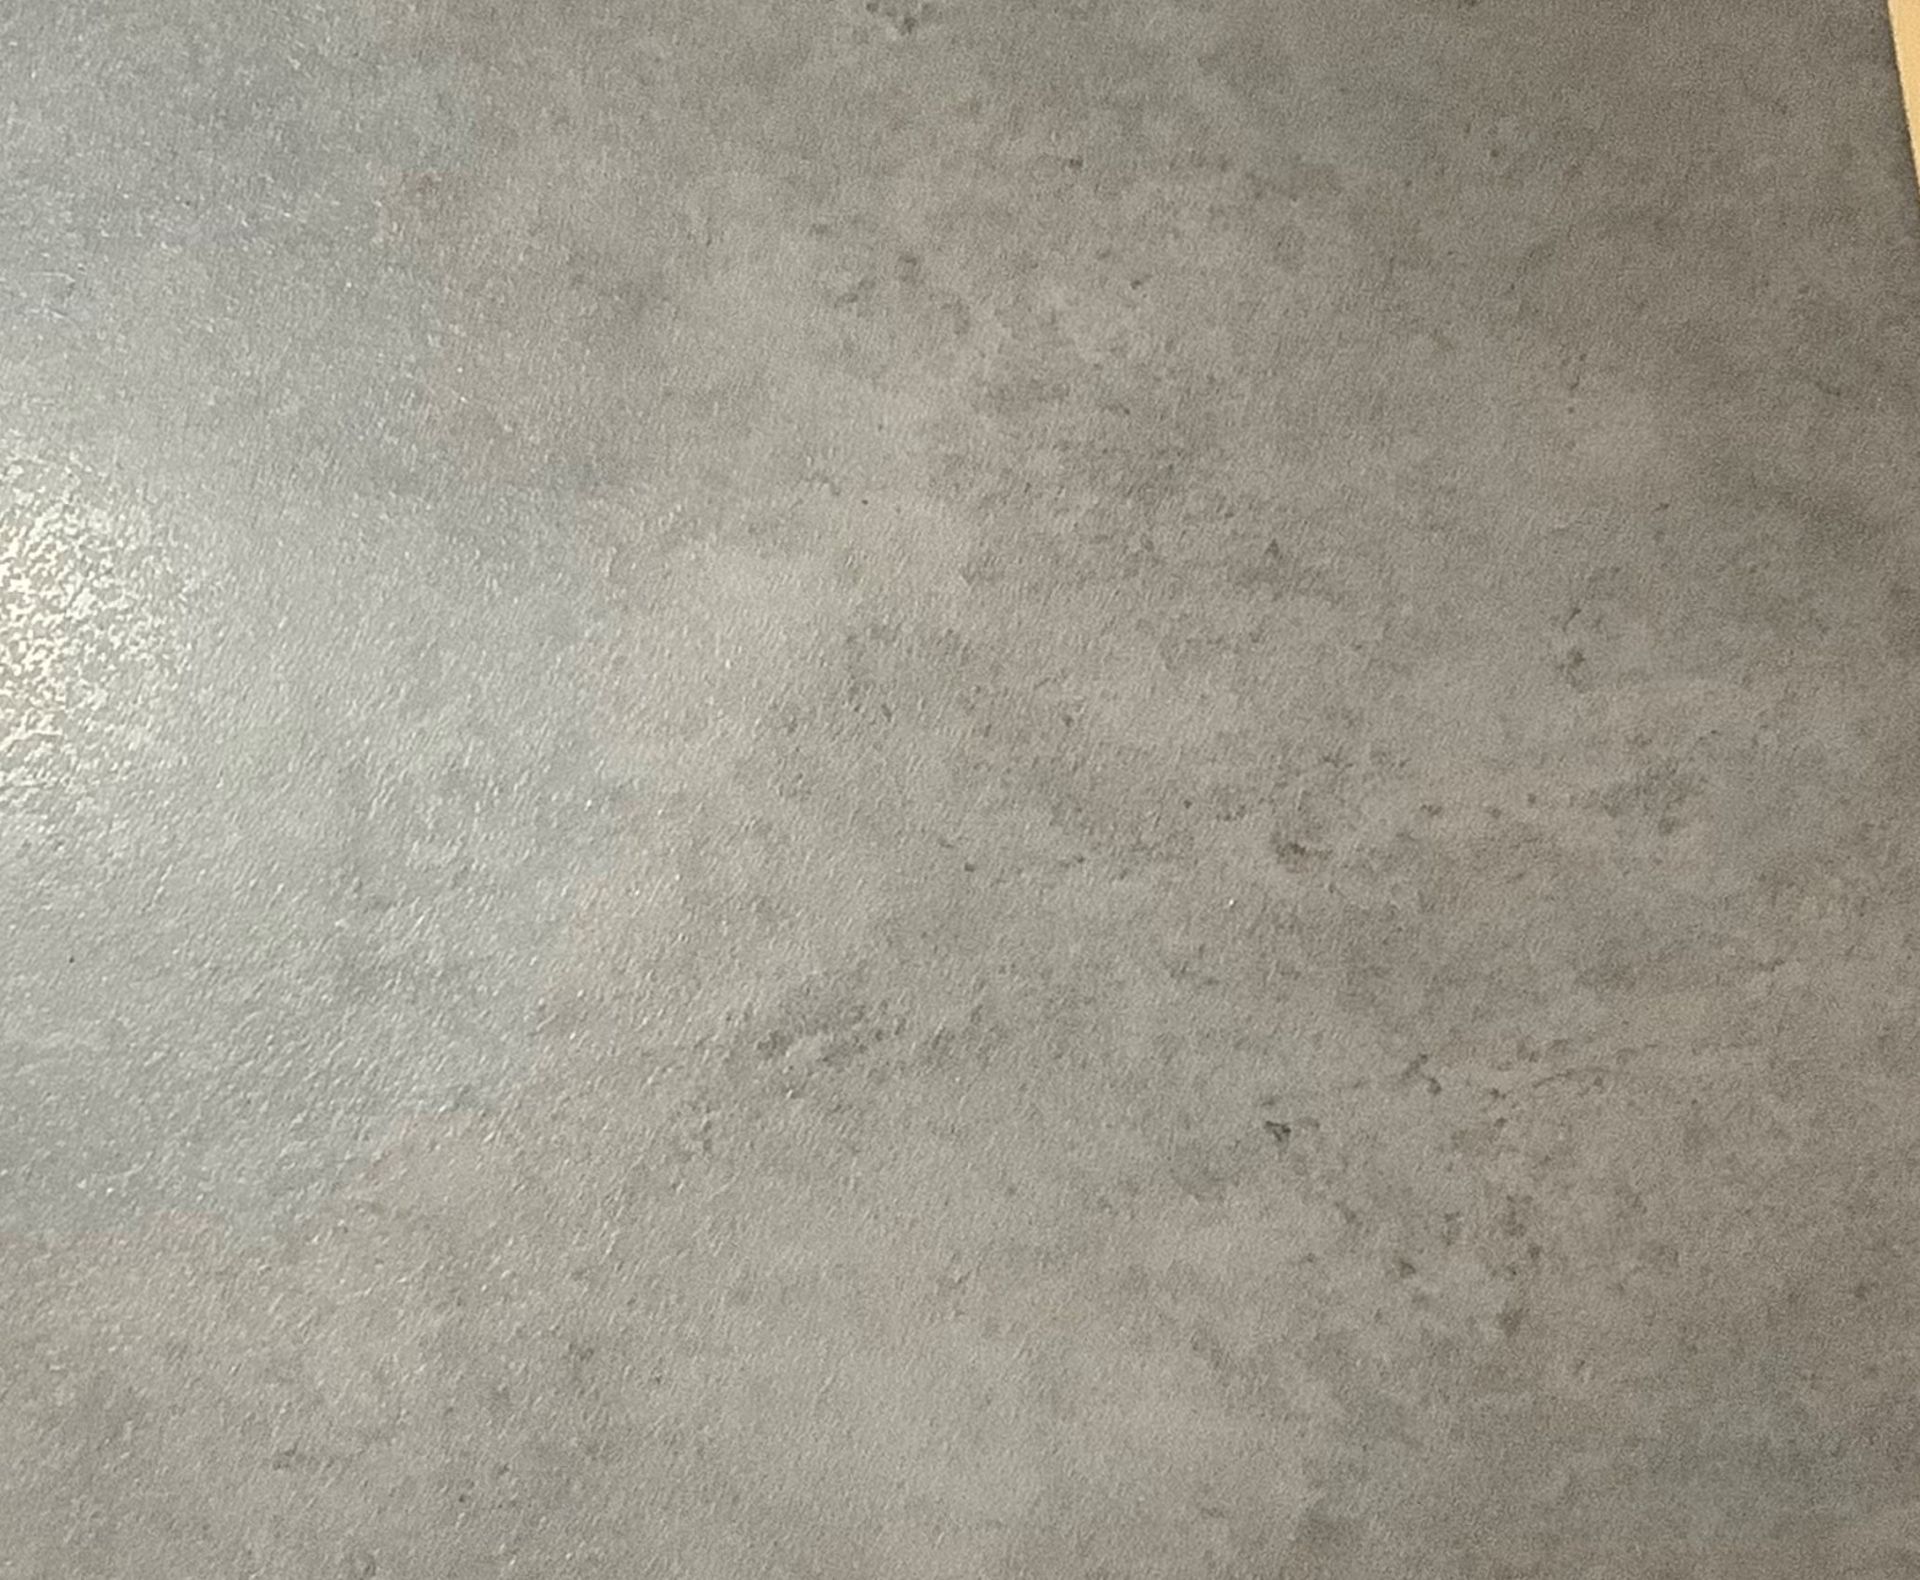 NEW 9.94m2 Porland Marengo Grey Wall and Floor Tiles. 450x450mm Per Tile, 8.8mm Thick. ndustria... - Image 3 of 3